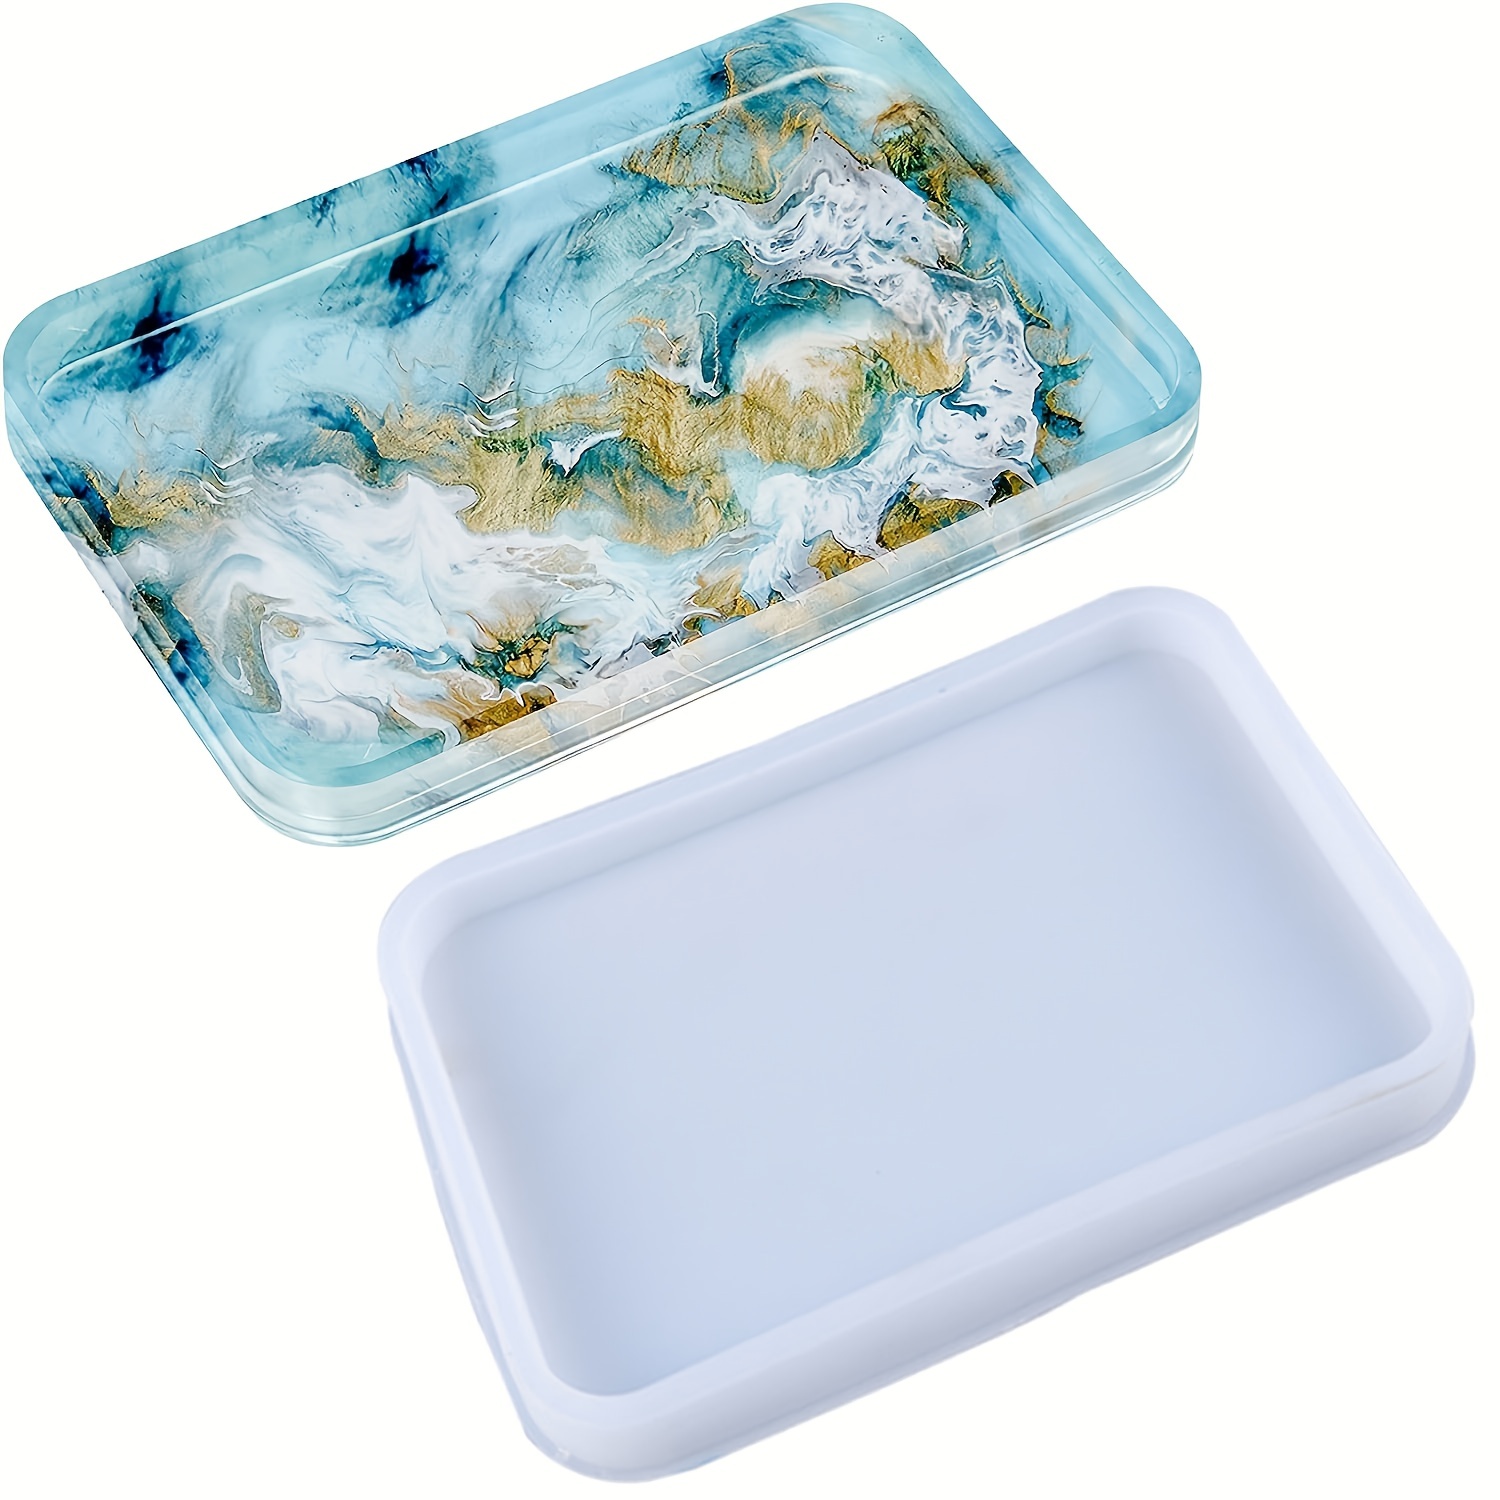 Rolling tray mold rectangular round edges for resin